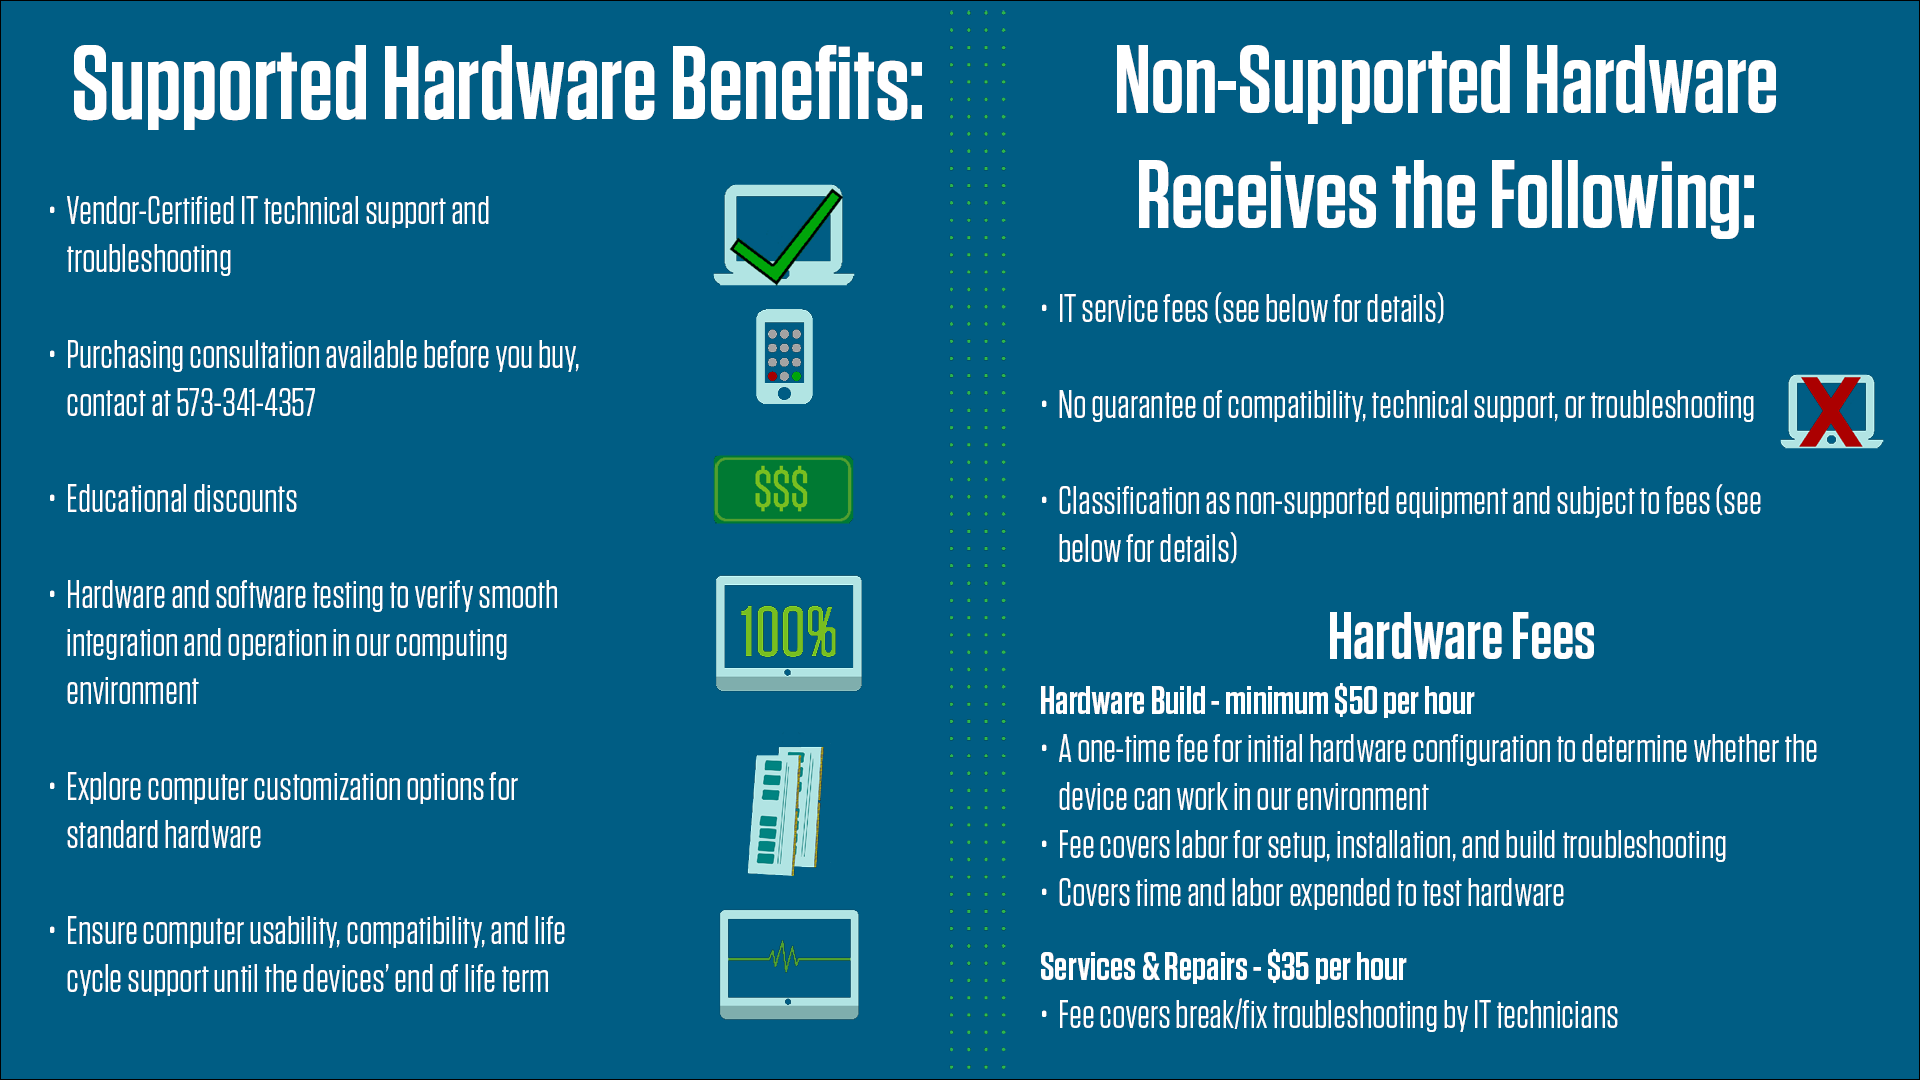 Description of the benefits of supported hardware, as well as the drawbacks of non-supported hardware. Hardware fees for non-supported hardware are also listed, with a one-time fee of $50 an hour for initial configuration and $35 an hour for services and repairs on a break/fix basis.